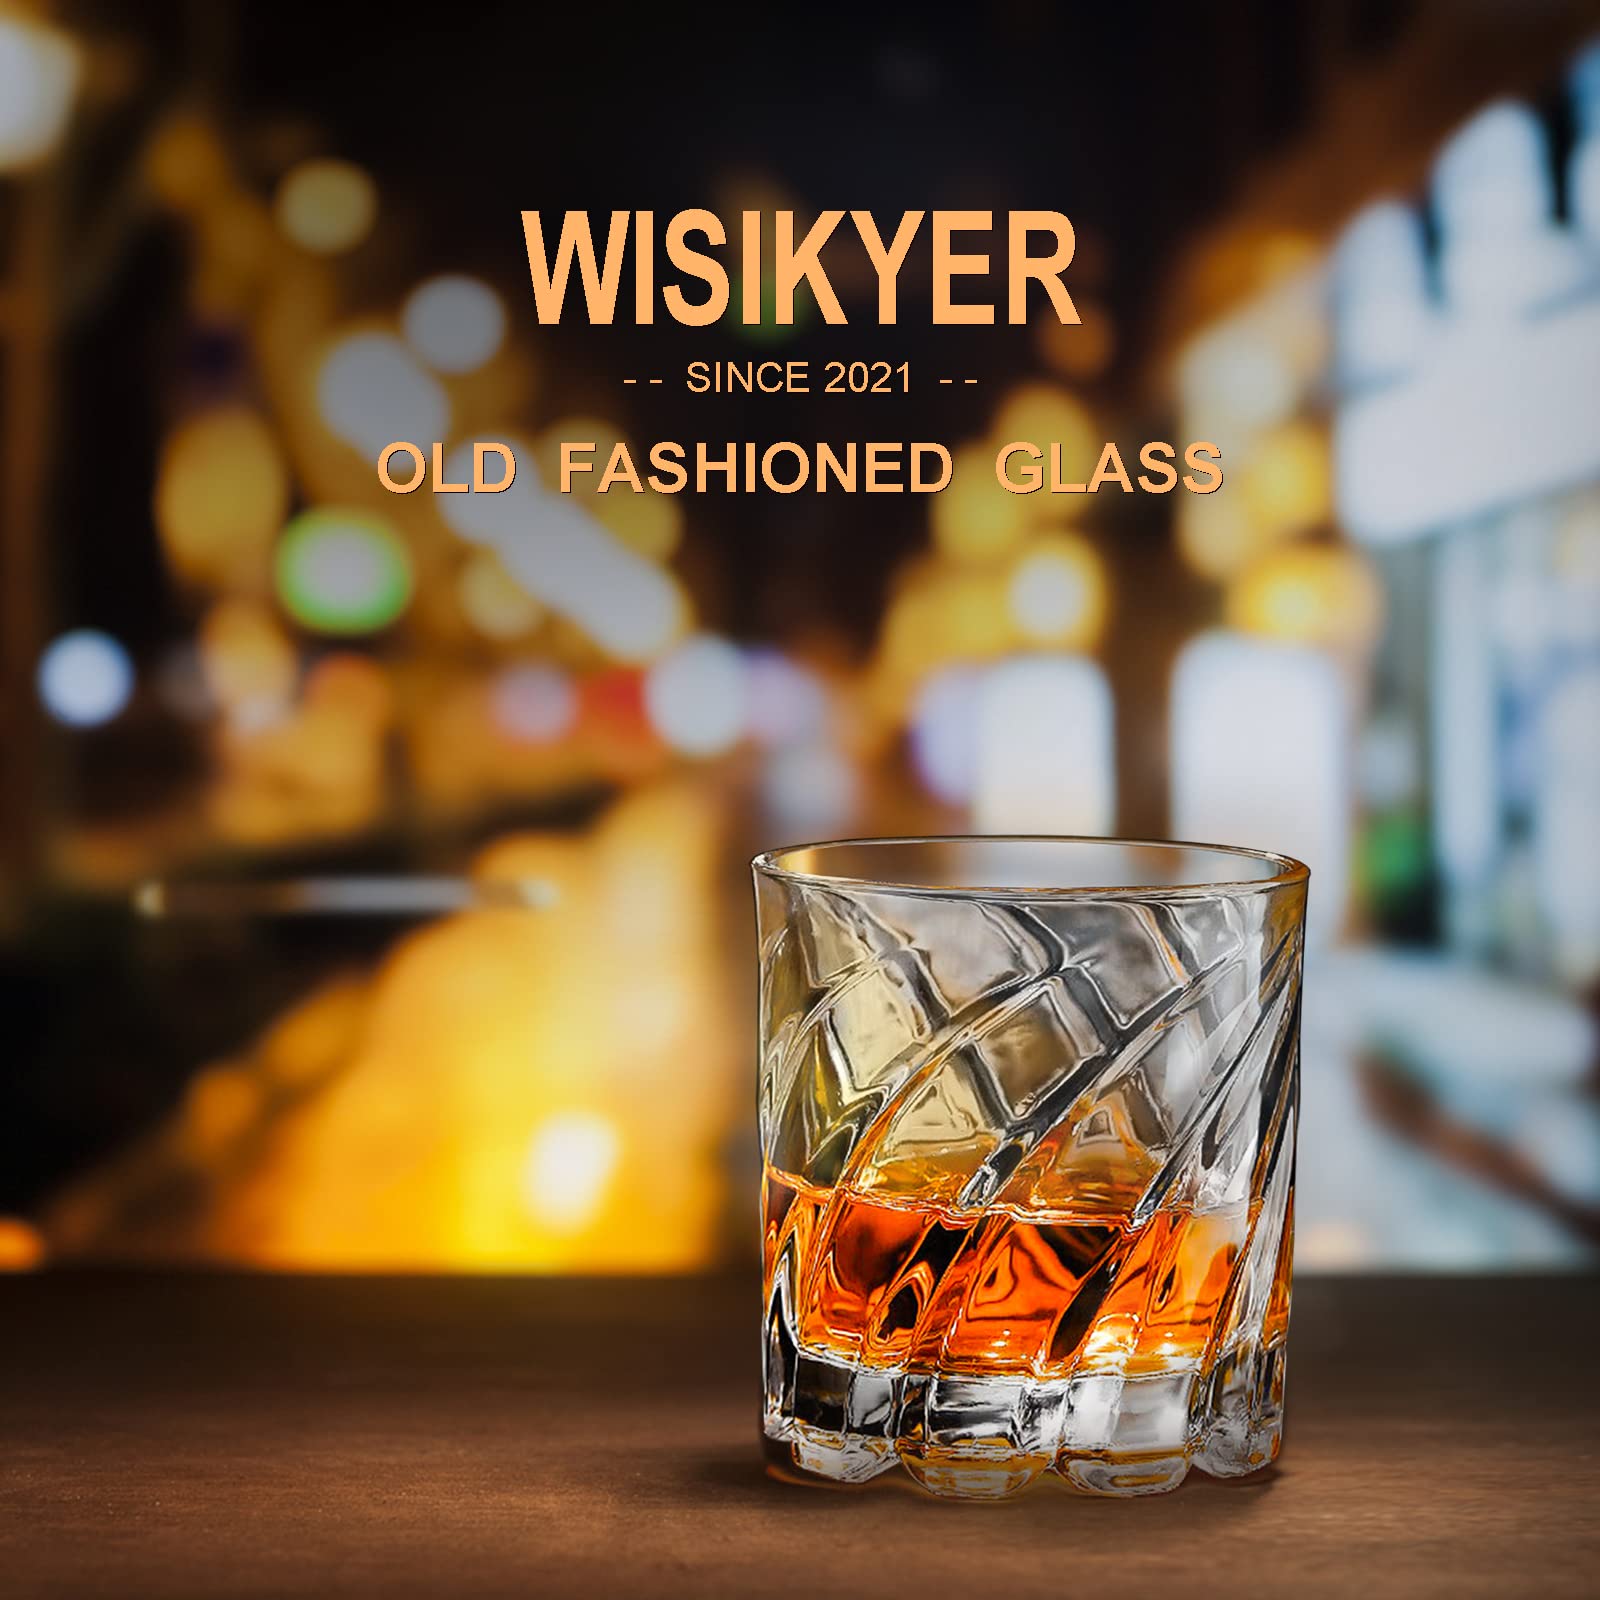 WISIKYER Whiskey Glasses Set 4, Spinning Bourbon Glass with Luxury Box Rotating Old Fashioned Rocks Glass Gifts on Birthday/Father's Day/Retirement, Scotch Glass Cup Gifts for Men/Father/Husband